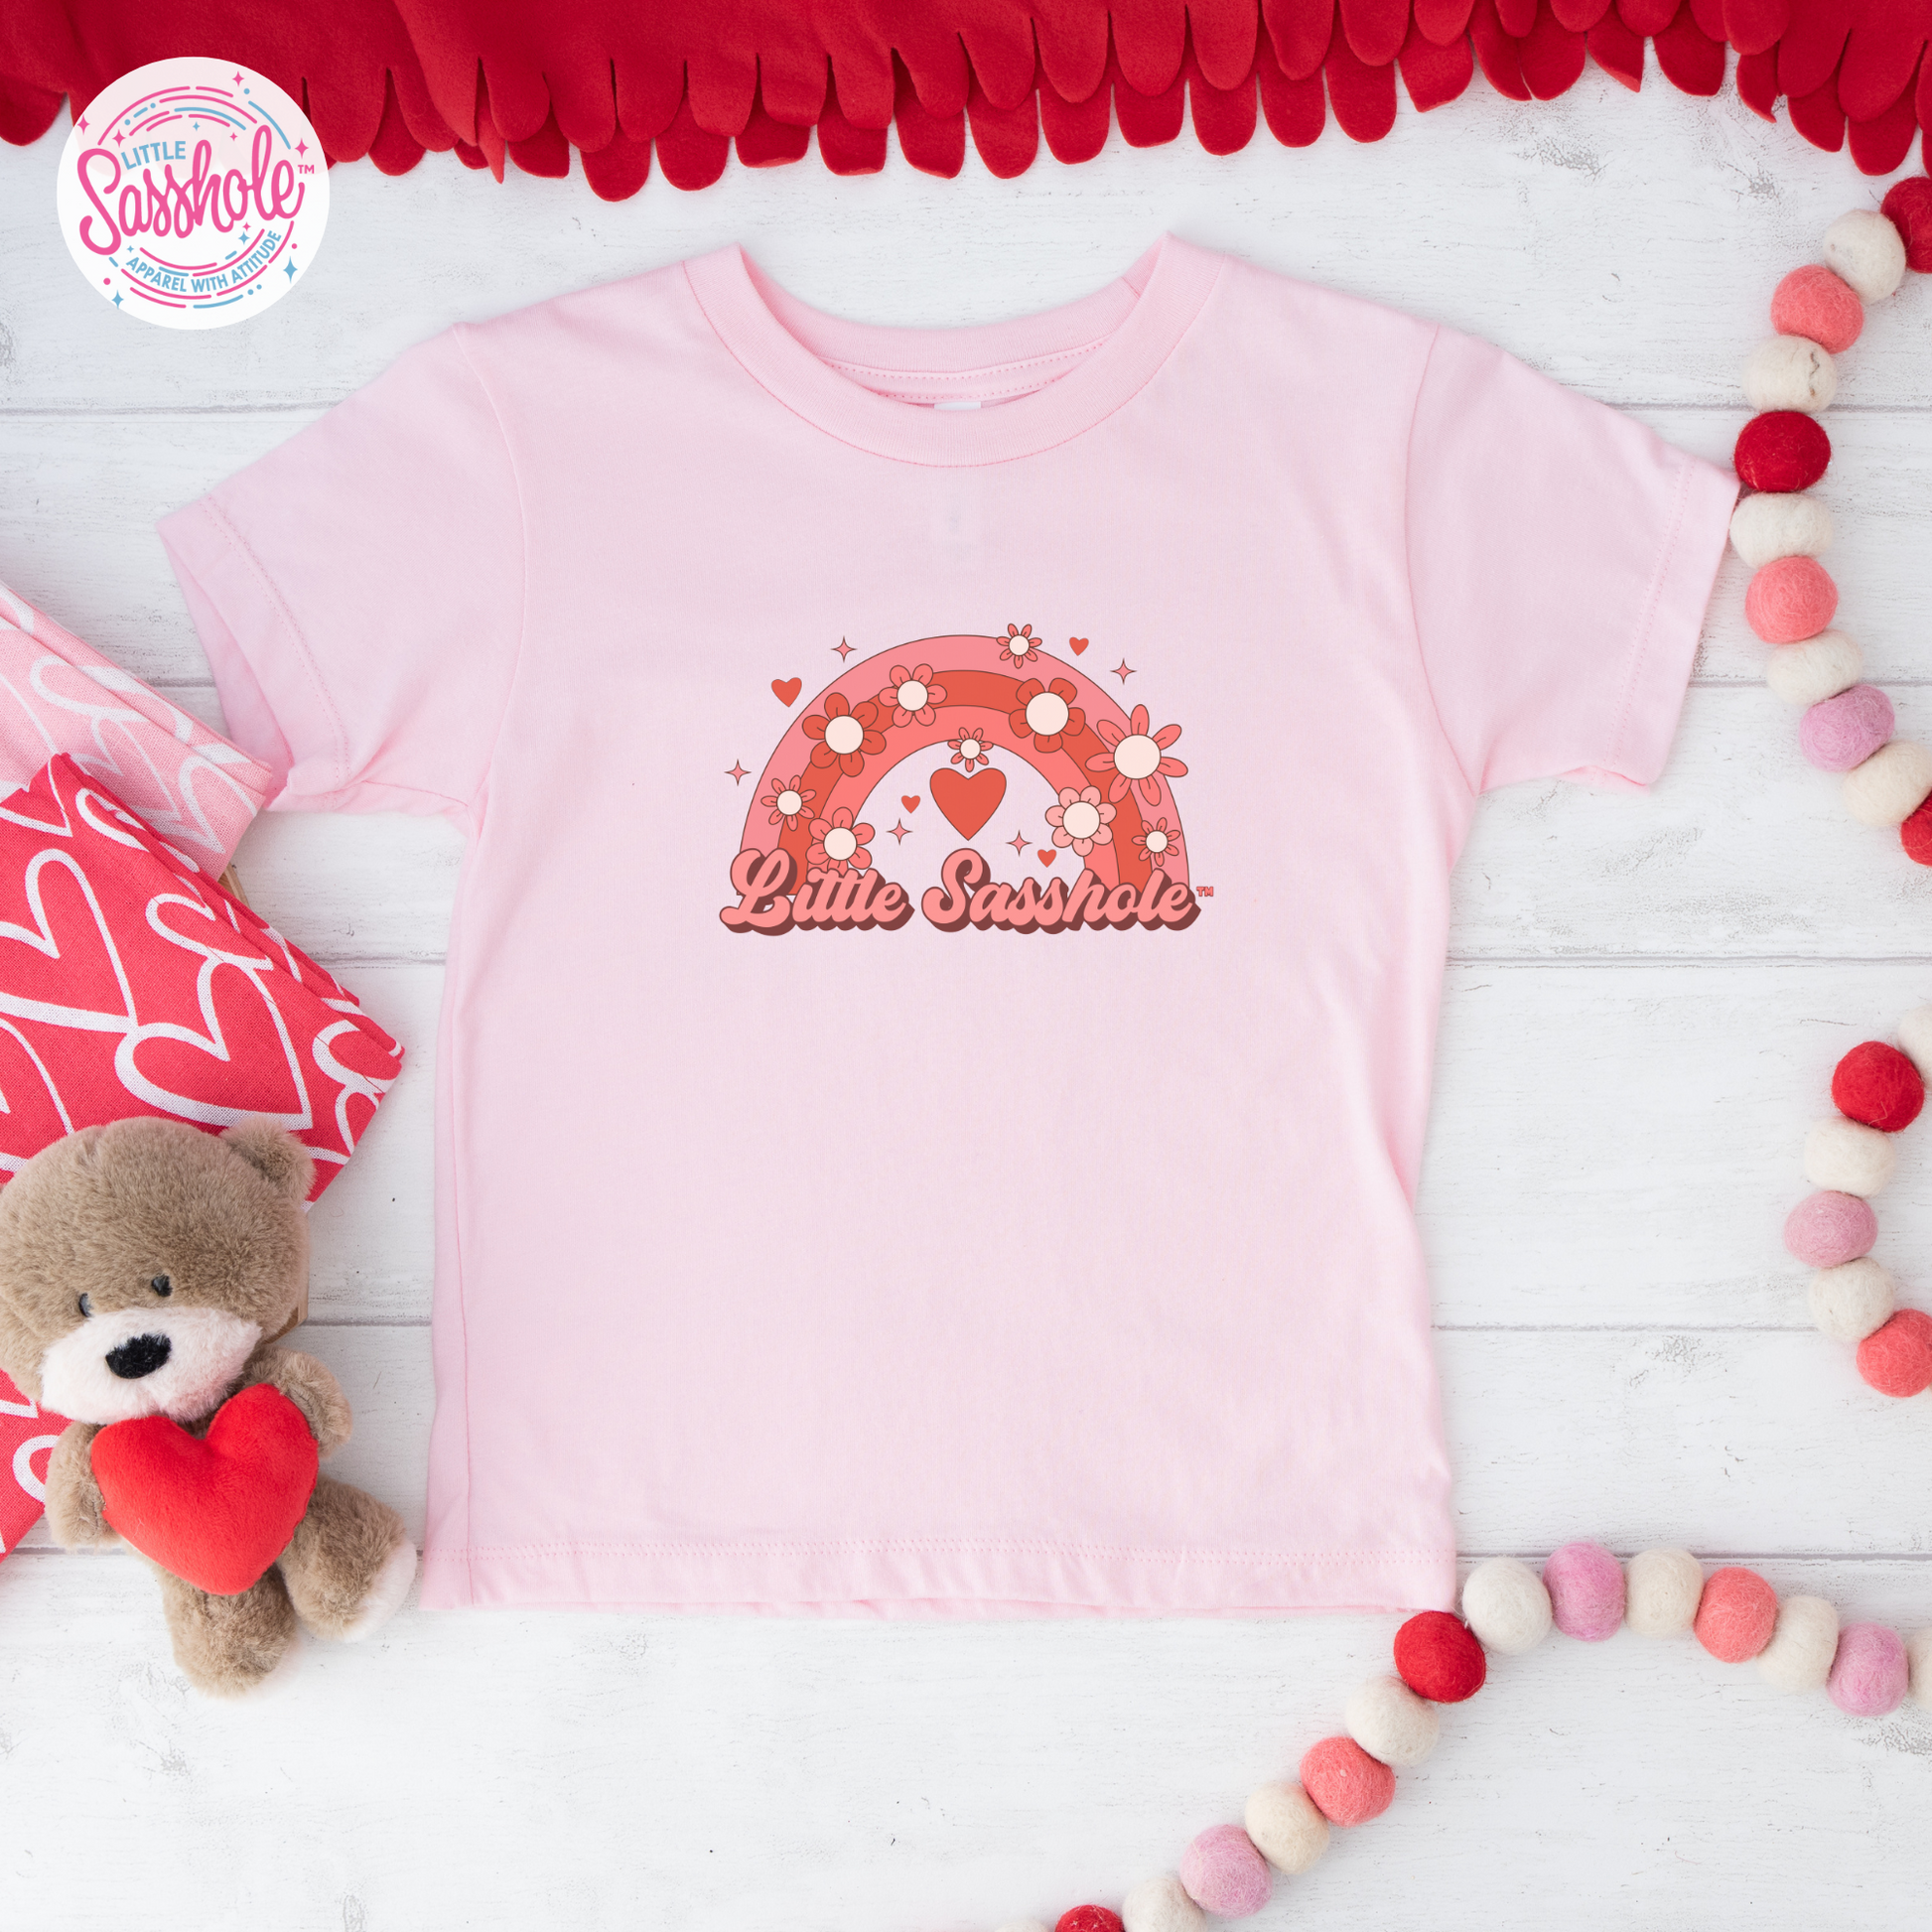 Valentine's wardrobe for toddlers, Valentine's fashion for little ones, Valentine's Day toddler style, Valentine's cuteness for toddlers, Valentine vibes toddler tee, Valentine toddler shirt, Valentine princess tee, Valentine joy for toddlers, Toddler girl's love-themed clothing, Toddler fashion for the love season, Toddler fashion for love season, Toddler cupid t-shirt, Toddler cupid in action tee, Toddler cupid fashion, T-shirts, Sweetheart toddler girl style, Sweetheart toddler girl apparel,